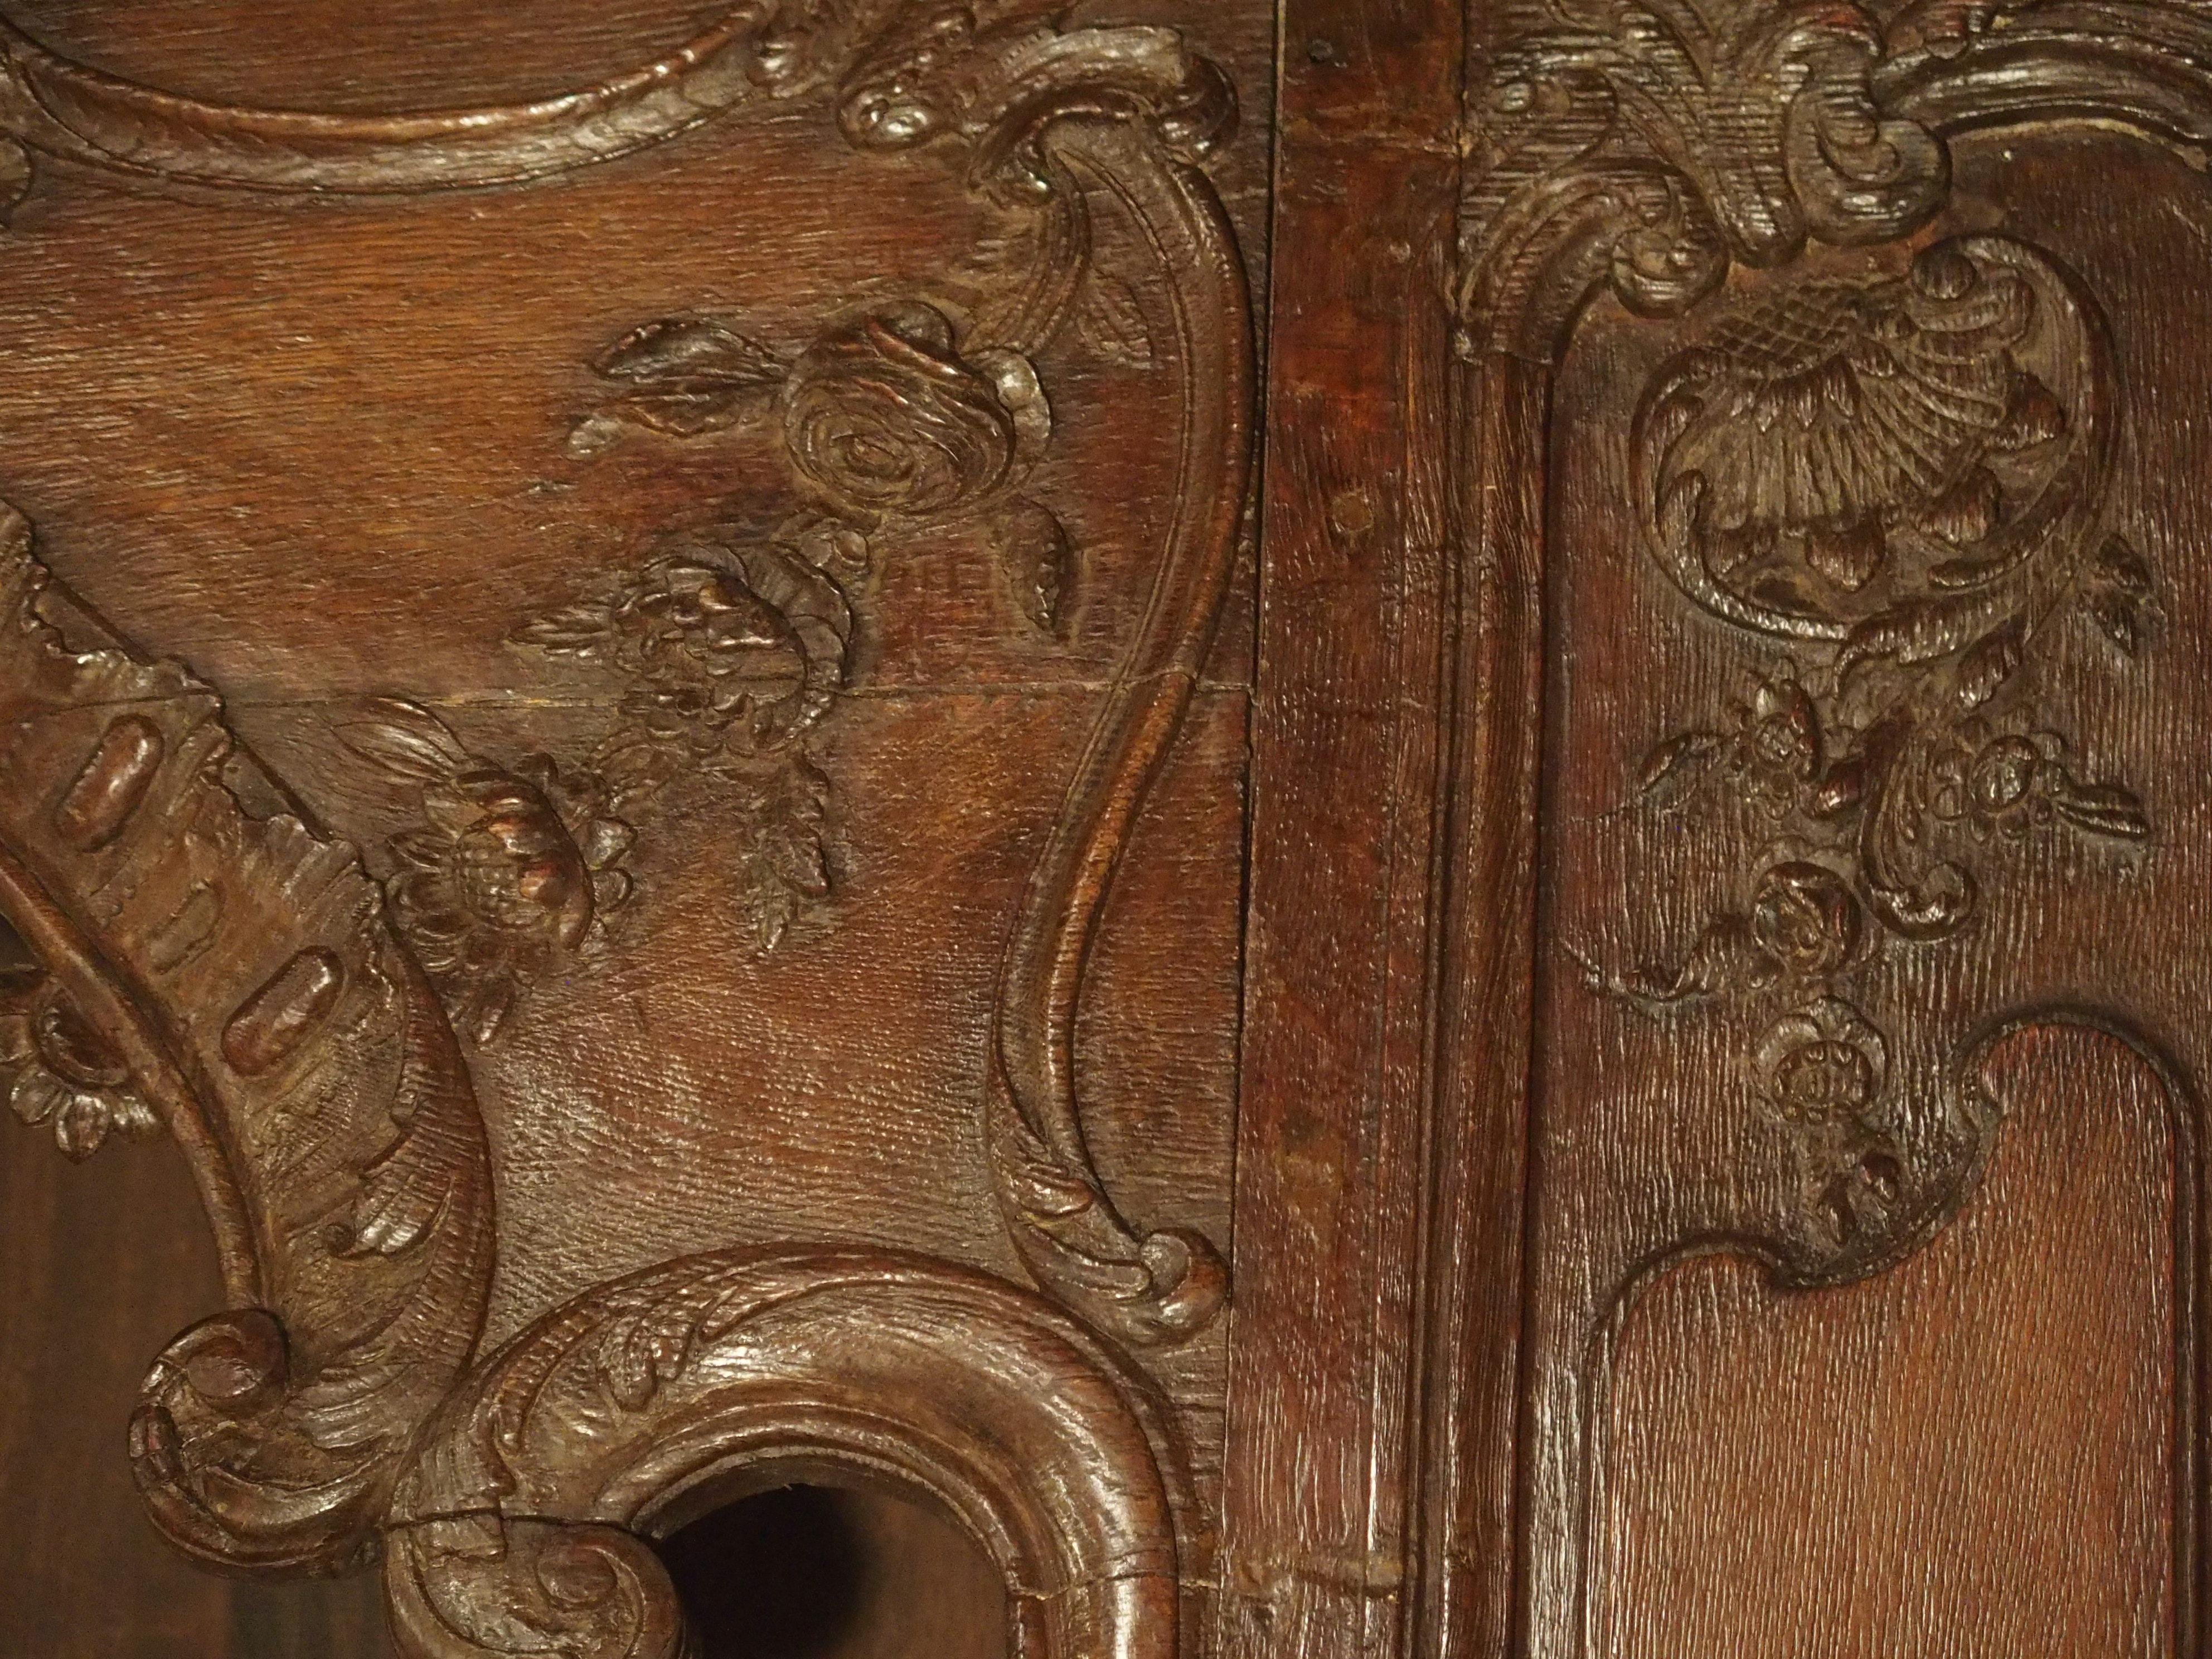 This absolutely stunning bookcase was constructed from a period French door surround, circa 1715. The frontage, crown, and sides are original and were delicately carved out of French oak. The large door surround would have been a part of a boiserie